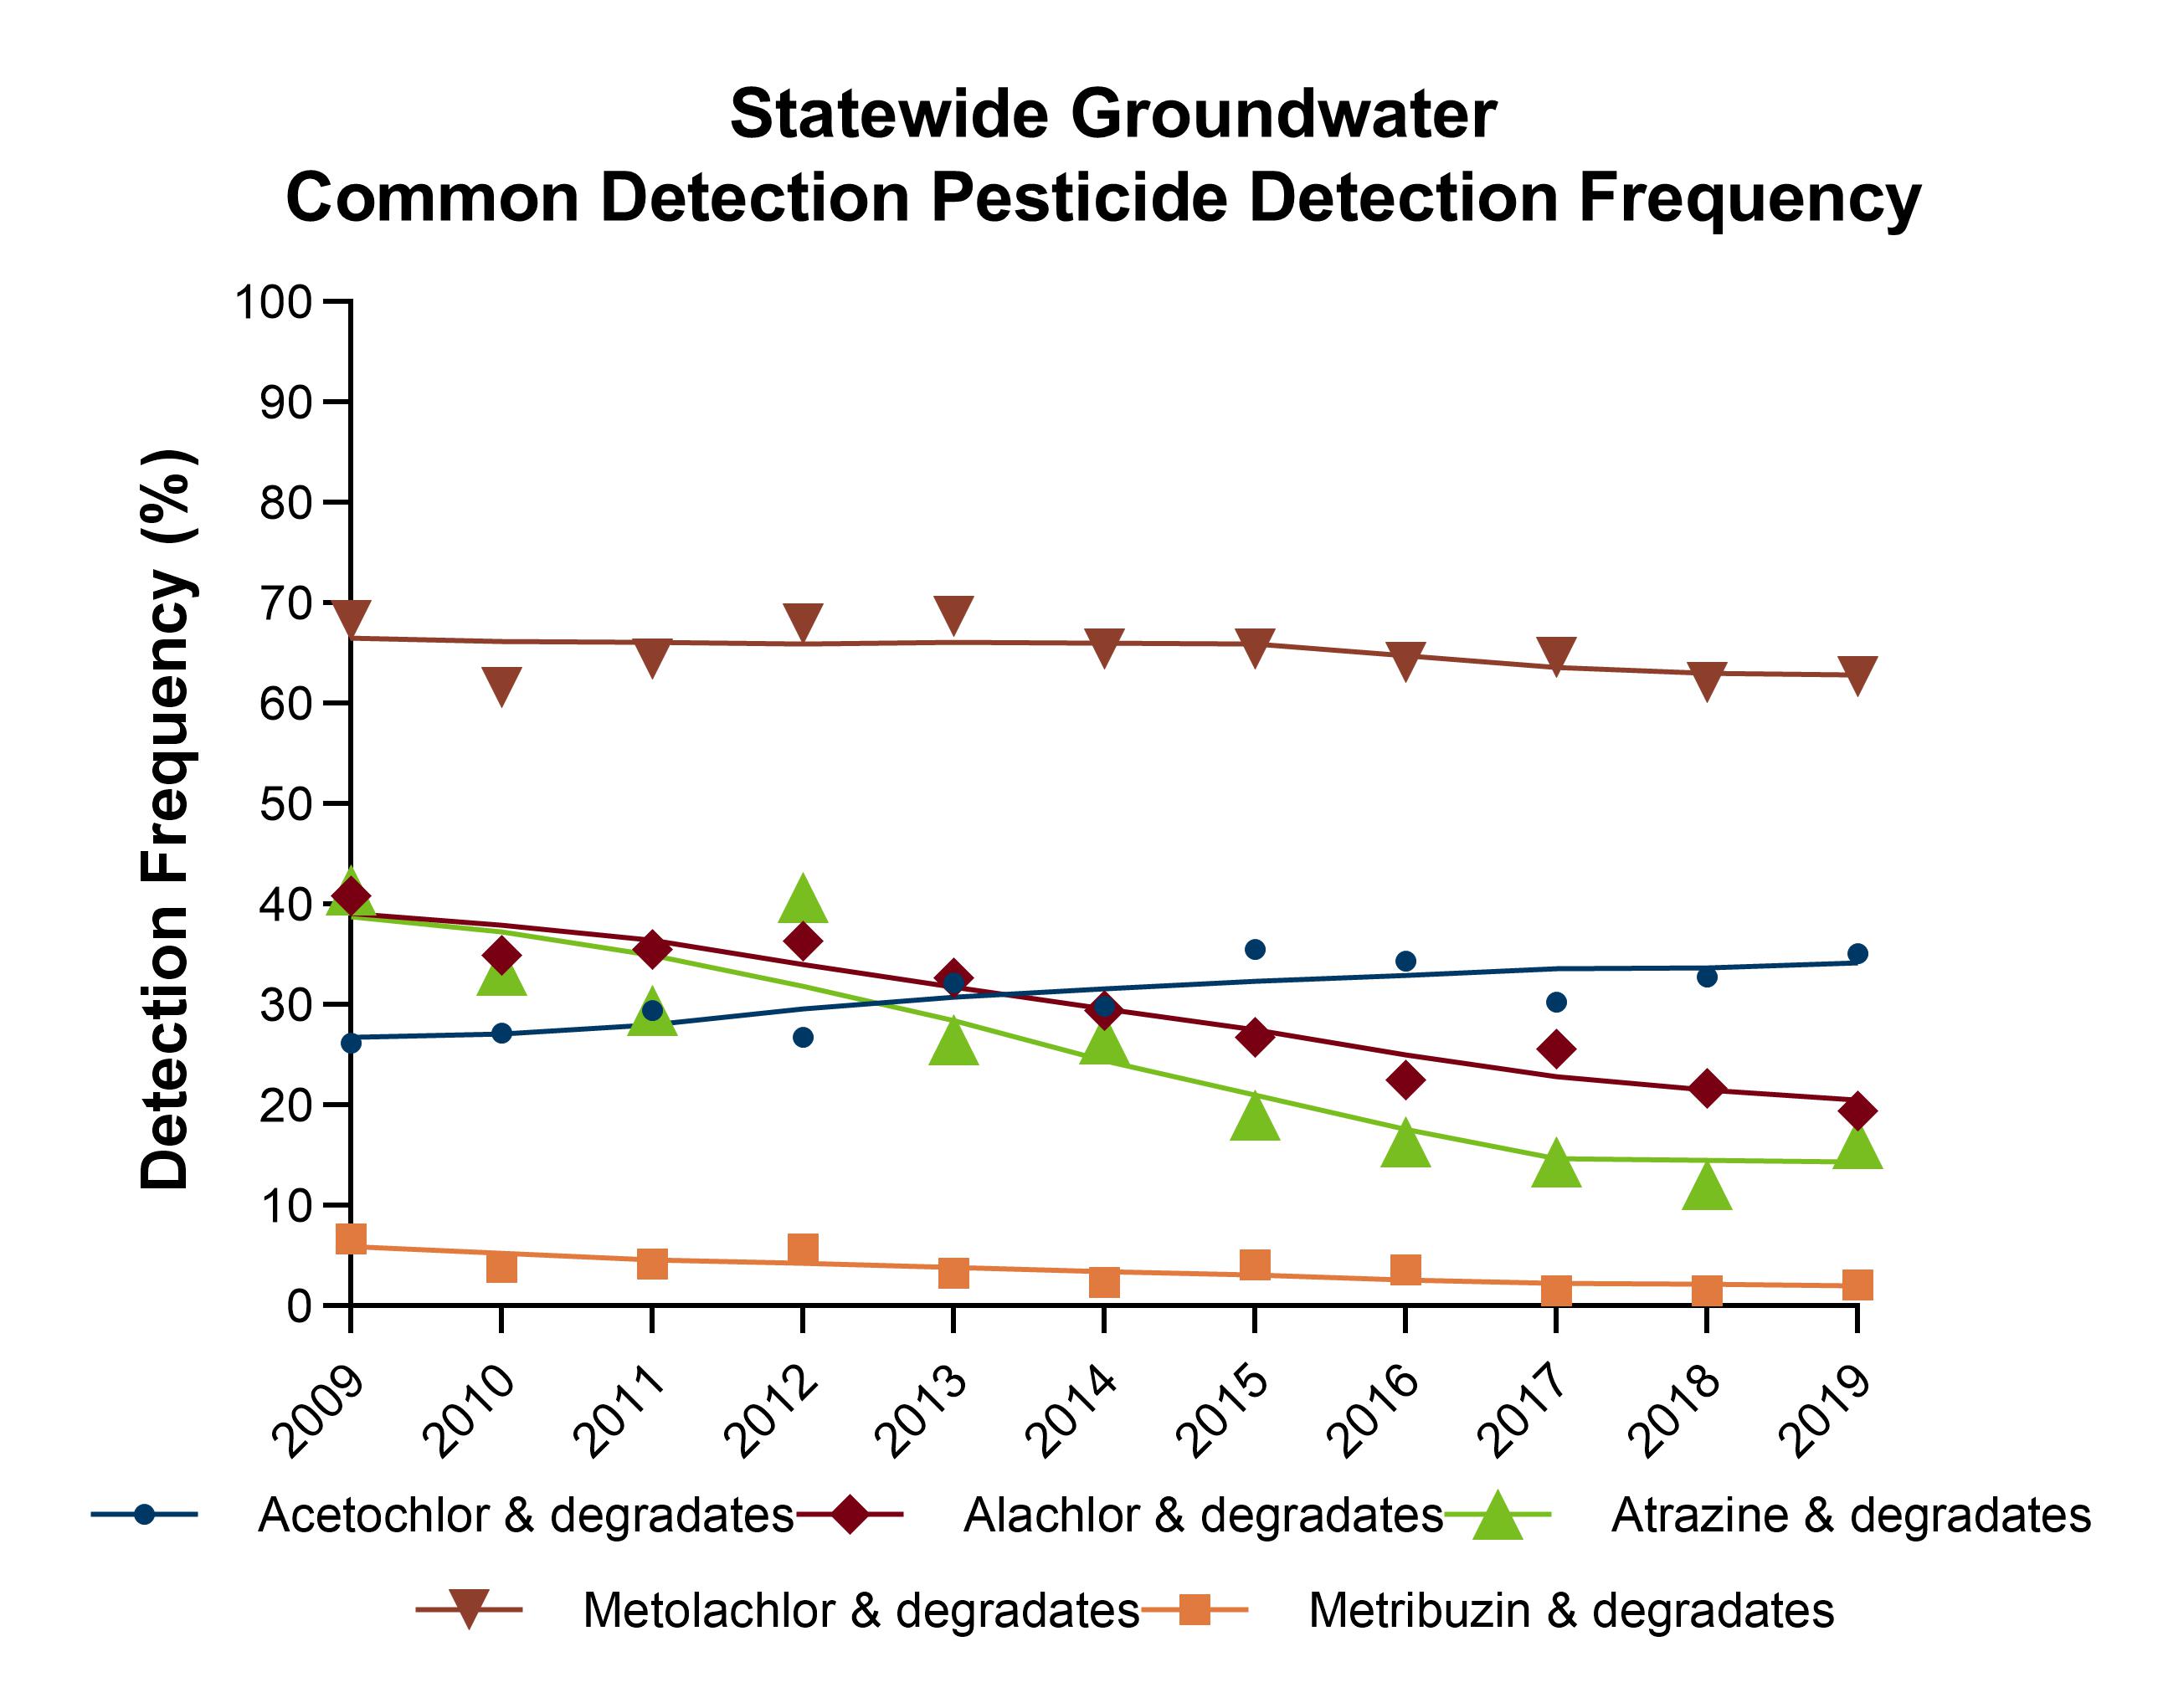 Pesticide detection frequency for statewide groundwater monitoring 2010-2019. The following pesticides are graphed and values include the pesticide plus their degradates: Acetochlor, Alachlor, Atrazine, Metolachlor, and Metribuzin. Detection frequencies range from about 67% to less than 10%. Over time, the line for Metolchlor is relatively flat, values are between 60-70%. Alachlor and Atrazine both have a decreasing slope, values fall within 40-15%. Metribuzin has slight decline all values under 10%. Acetochlor show a slight increase over time, values fall between 25-40%. 